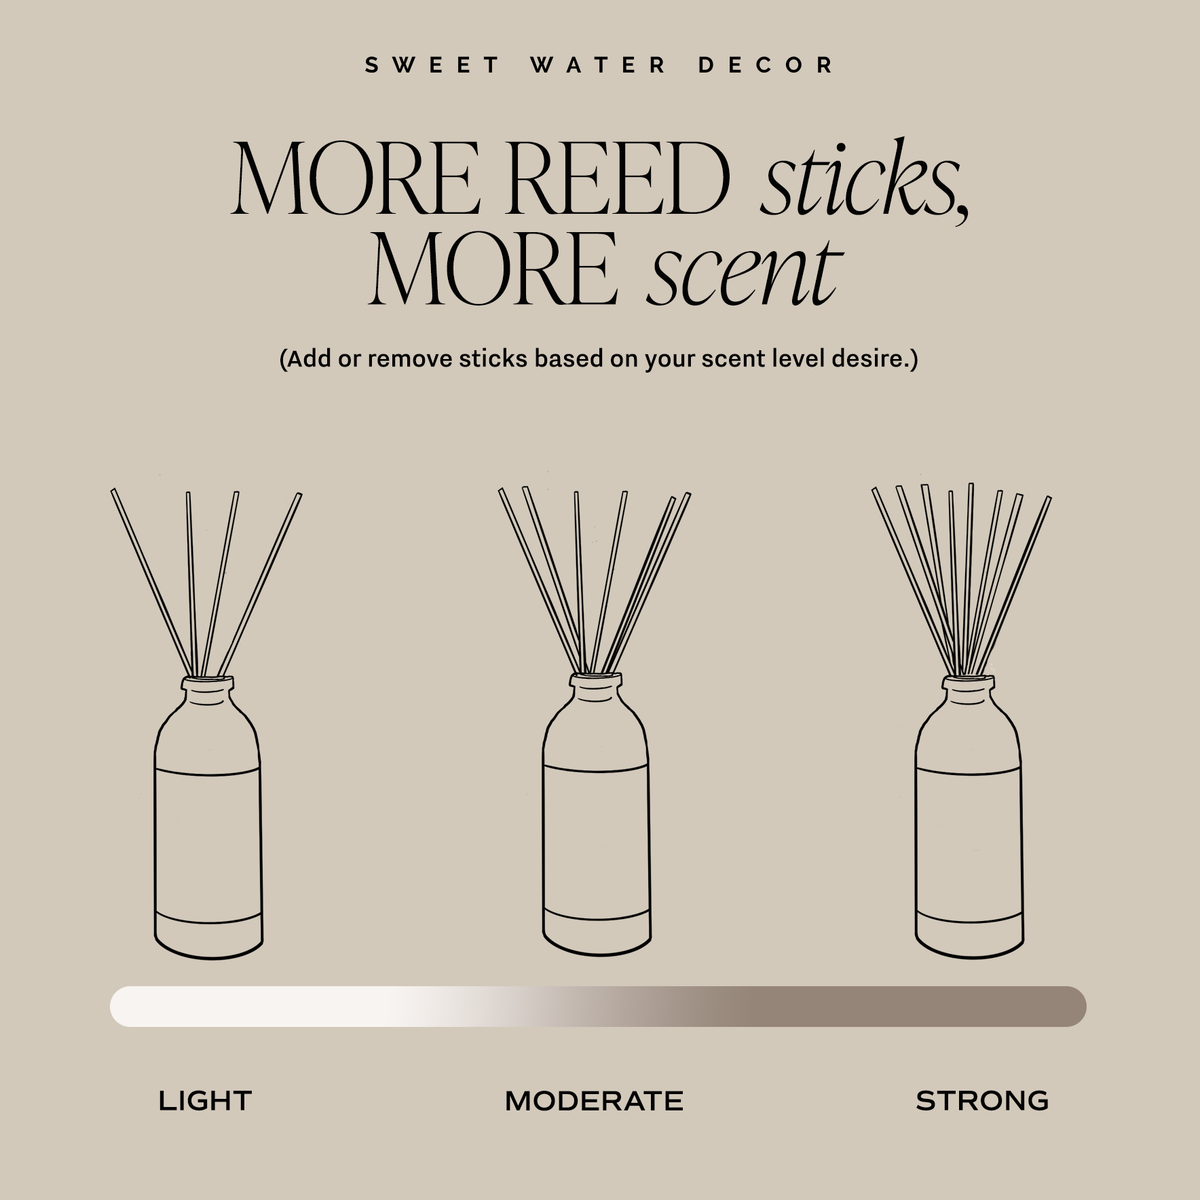 Spa Day Reed Diffuser - Gifts & Home Decor